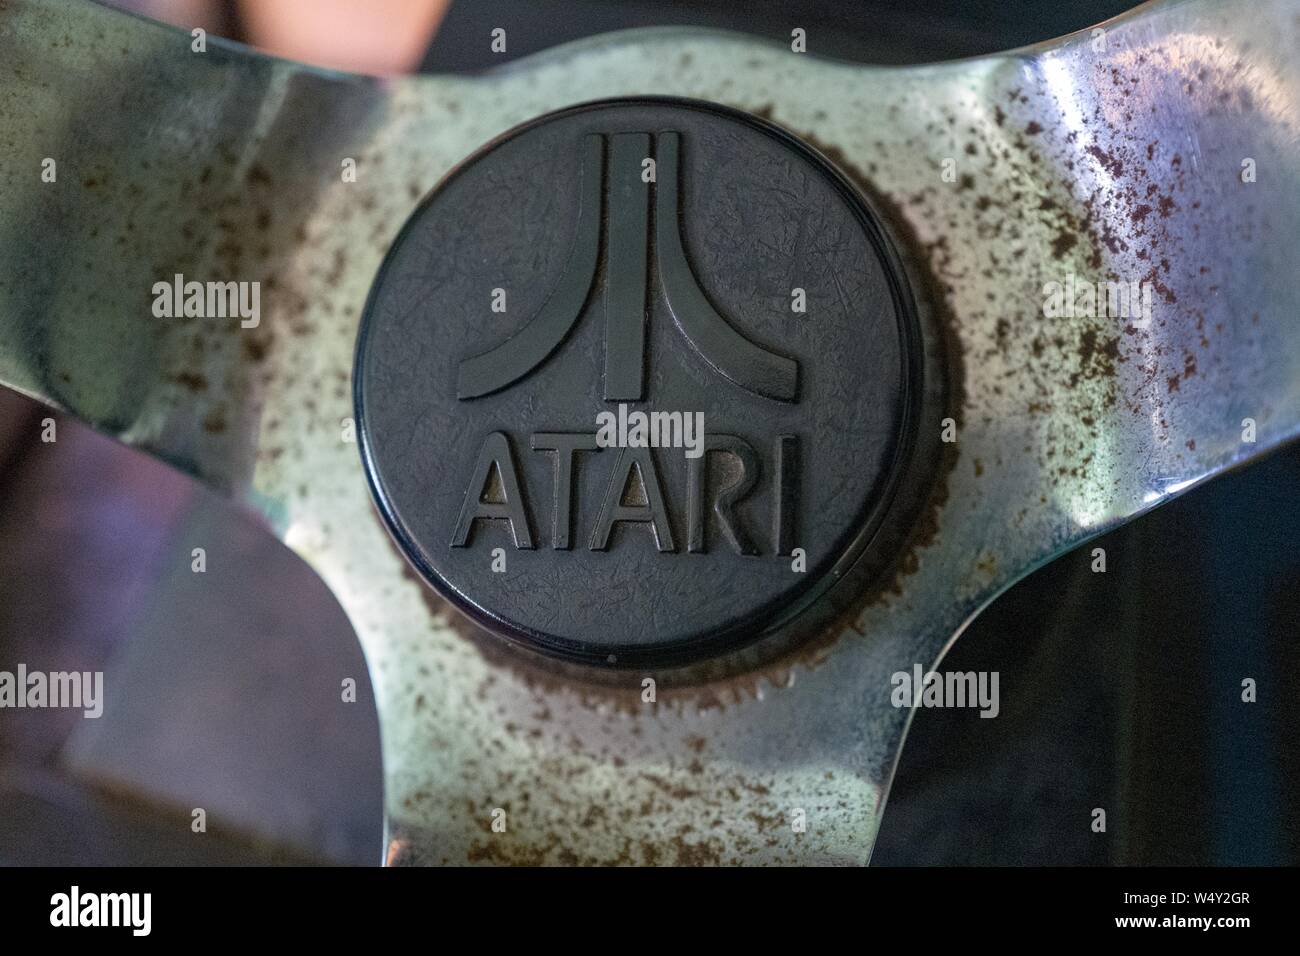 Close-up of logo for video and arcade game manufacturer Atari on a 1980s era arcade game console, April 12, 2019. () Stock Photo